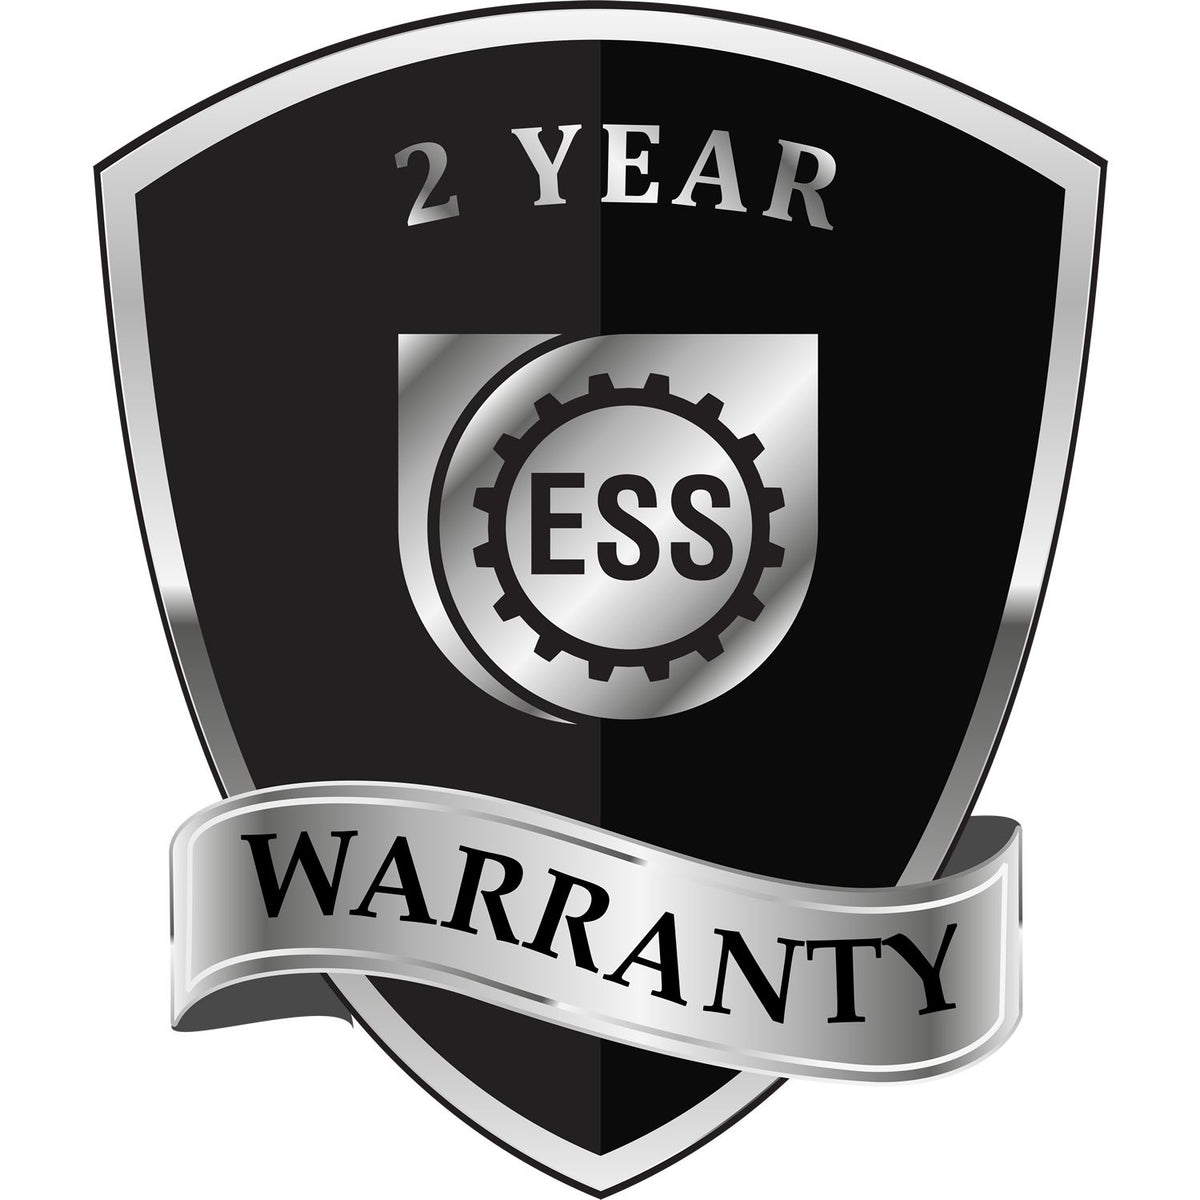 A black and silver badge or emblem showing warranty information for the Hybrid Wisconsin Geologist Seal